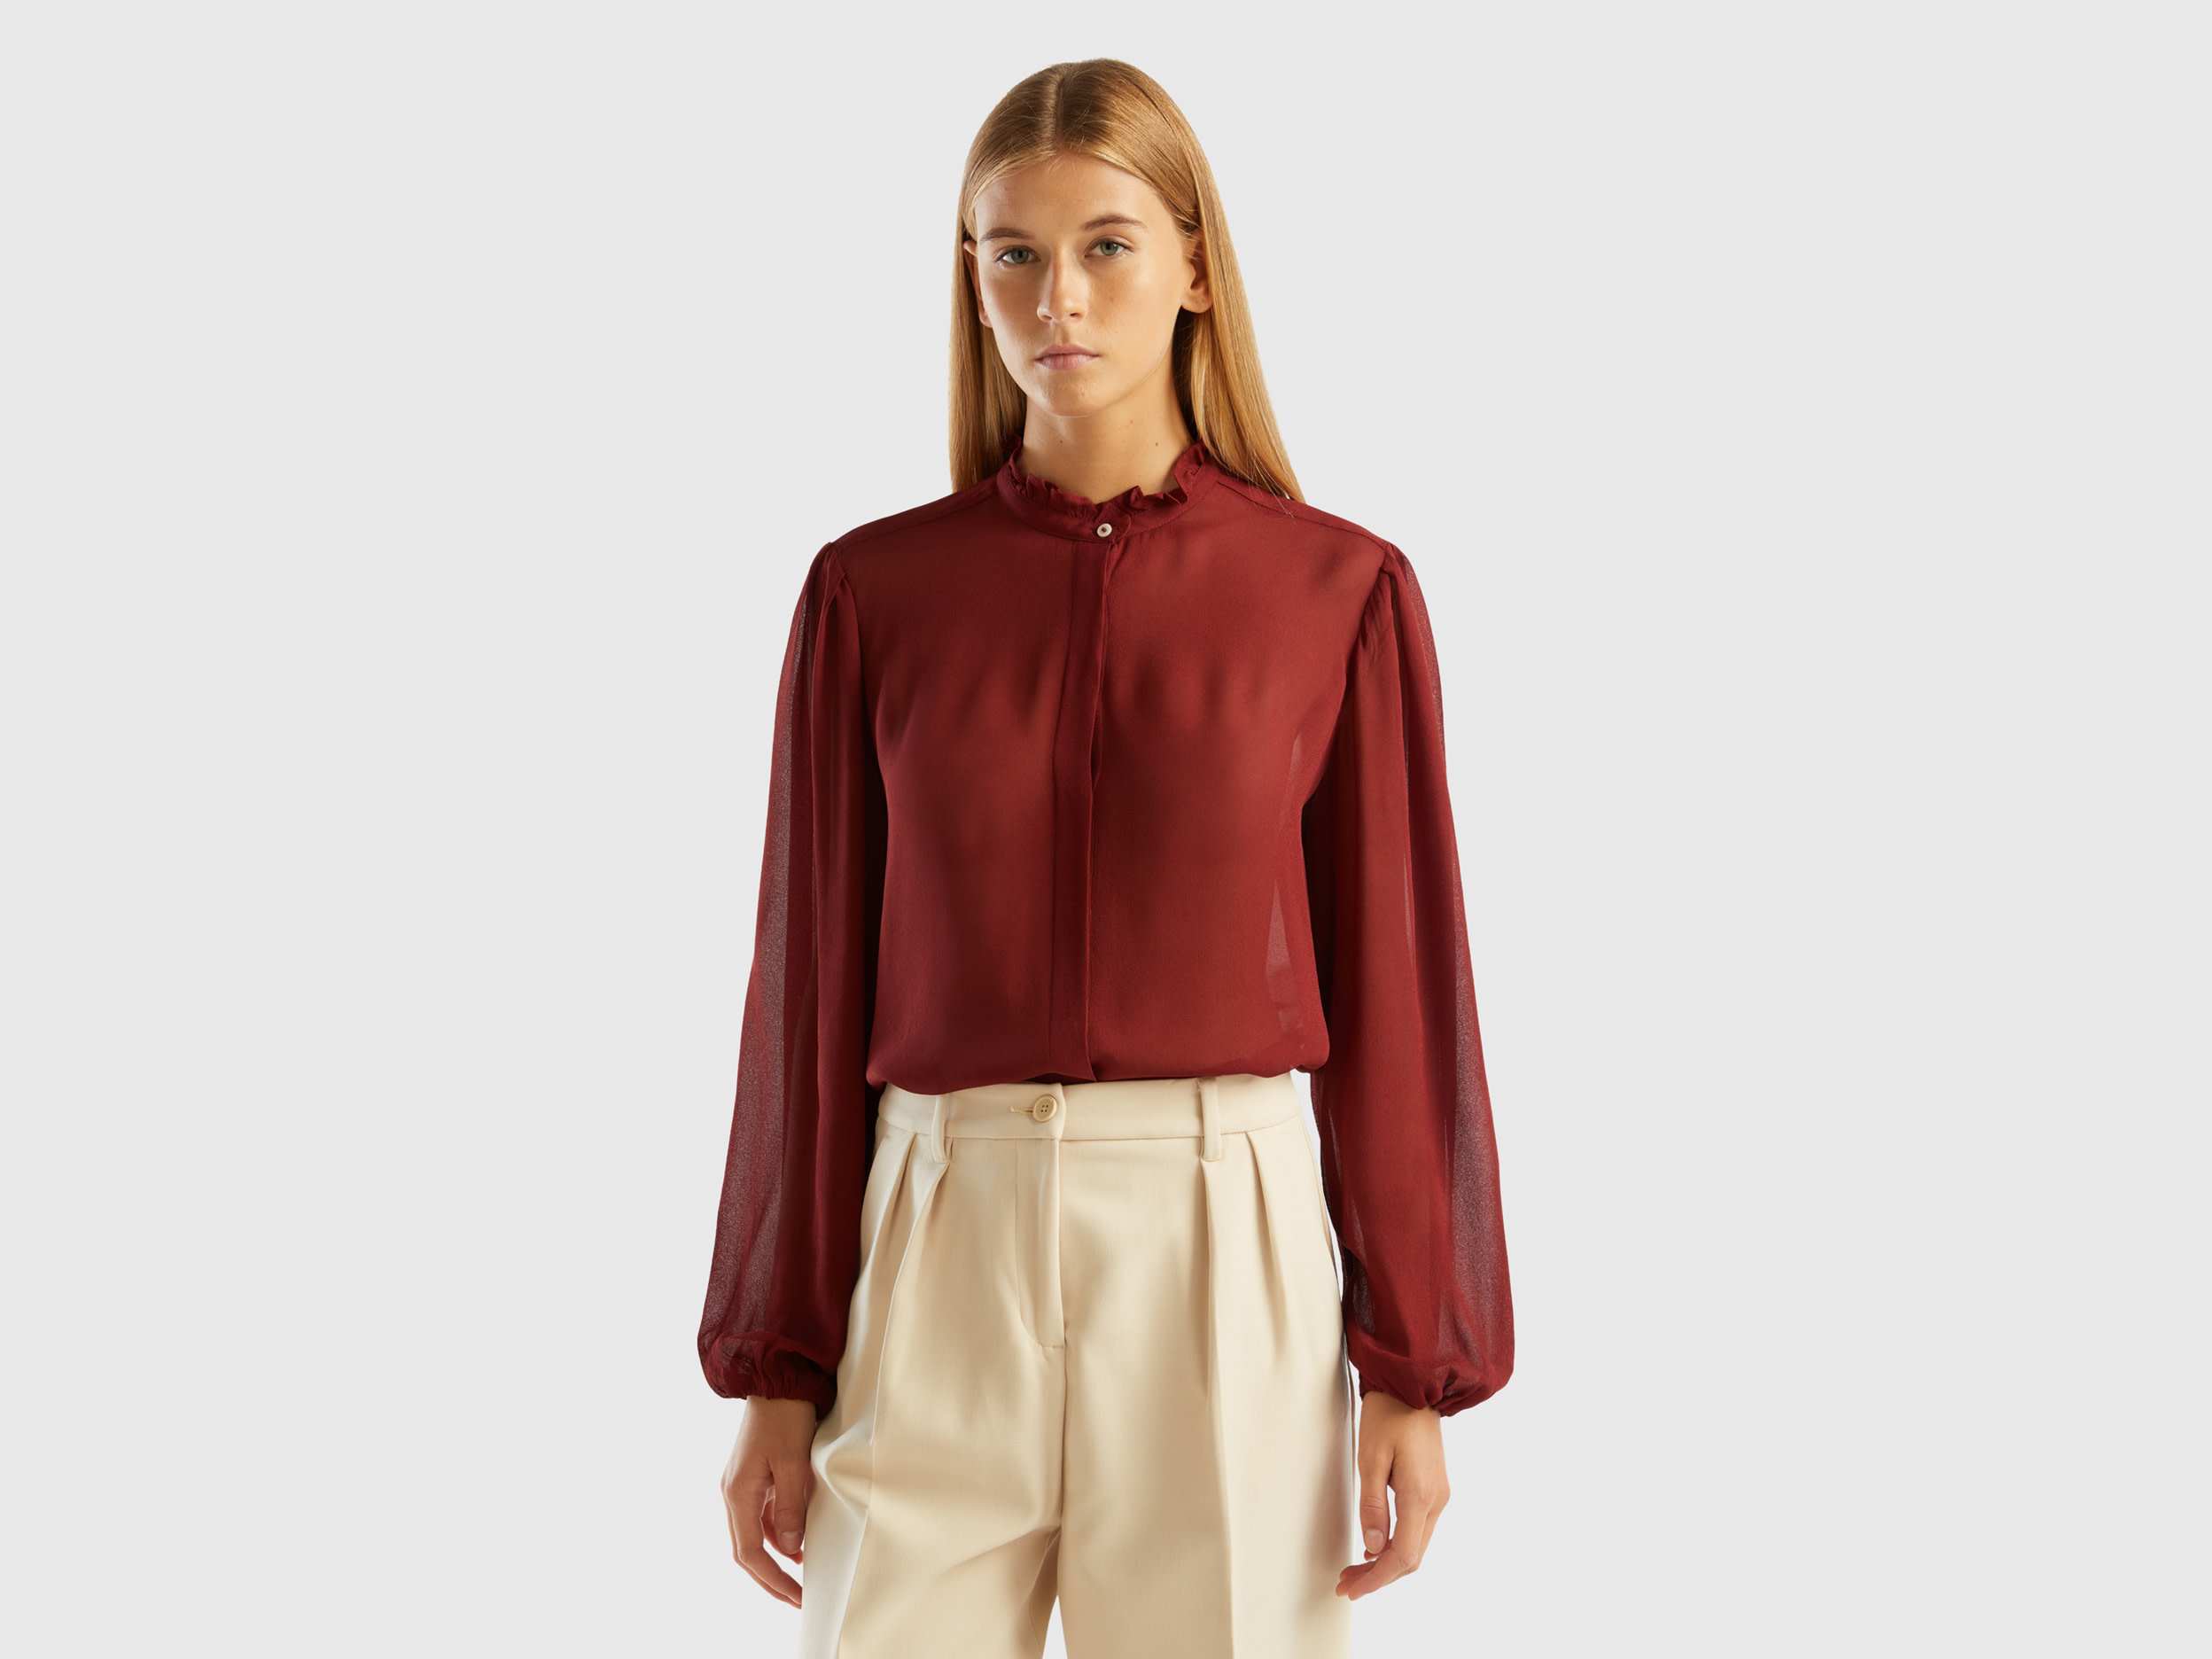 Benetton, Flowy Shirt With Rouches, size S, Burgundy, Women